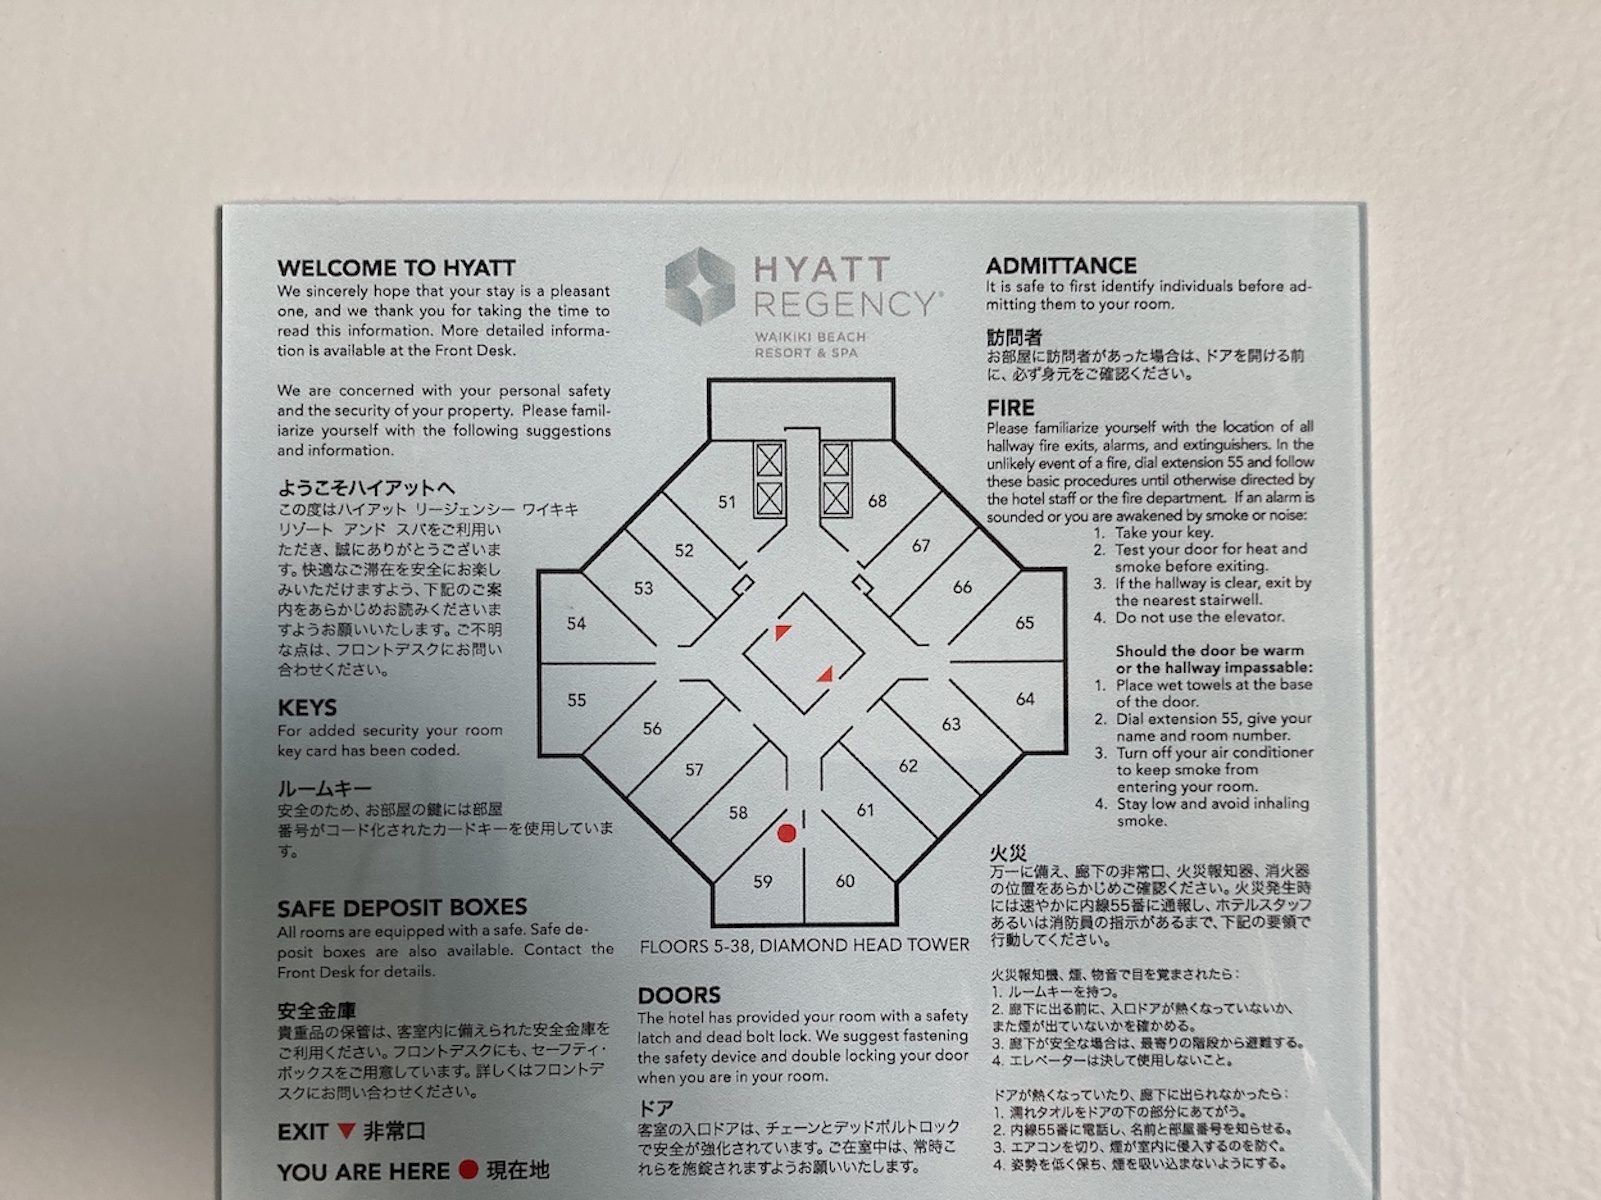 Photo of emergency exit map on the back of our hotel room door, showing the layout of the 34th floor